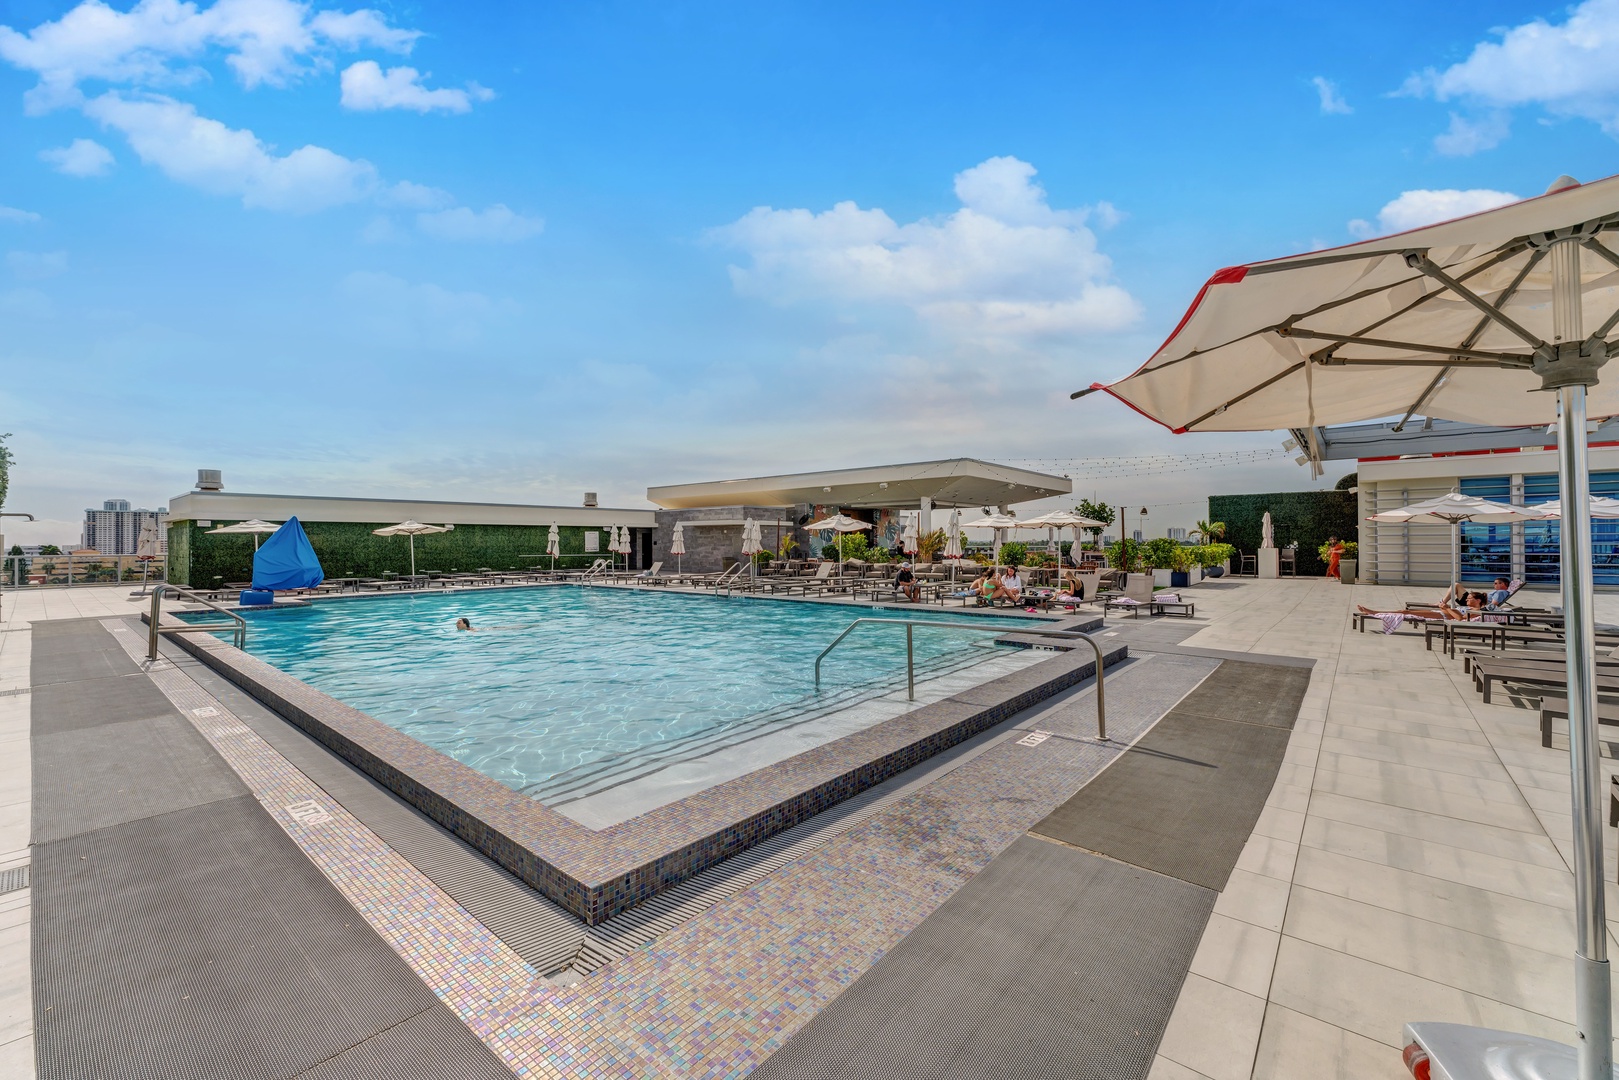 Make a splash in the sparkling communal pool or lounge the day away